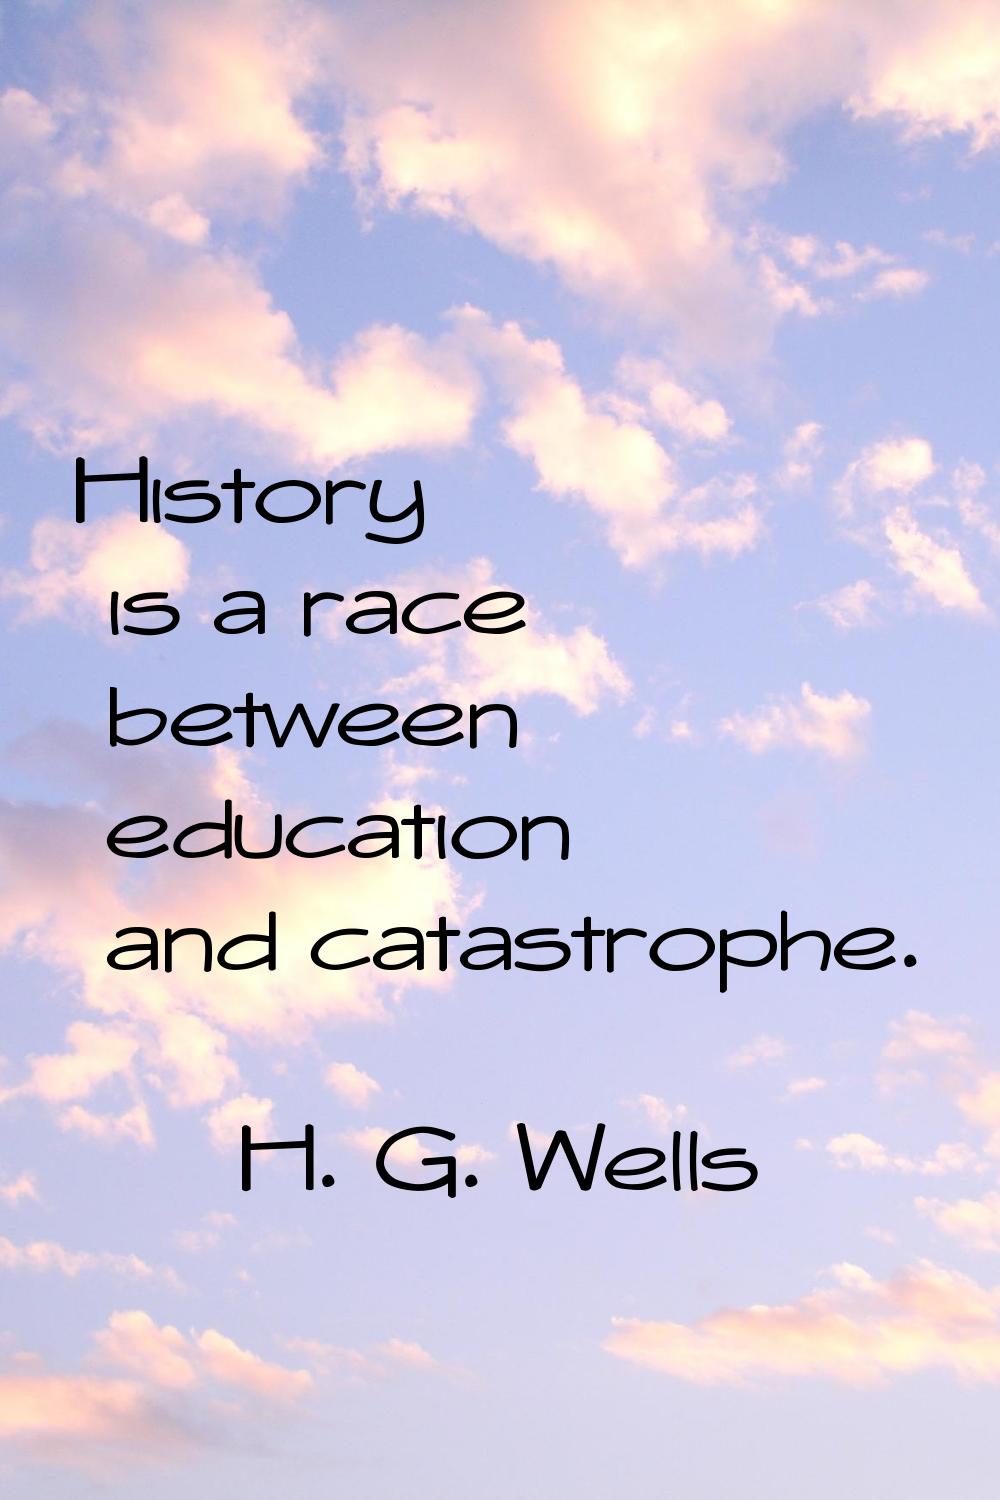 History is a race between education and catastrophe.